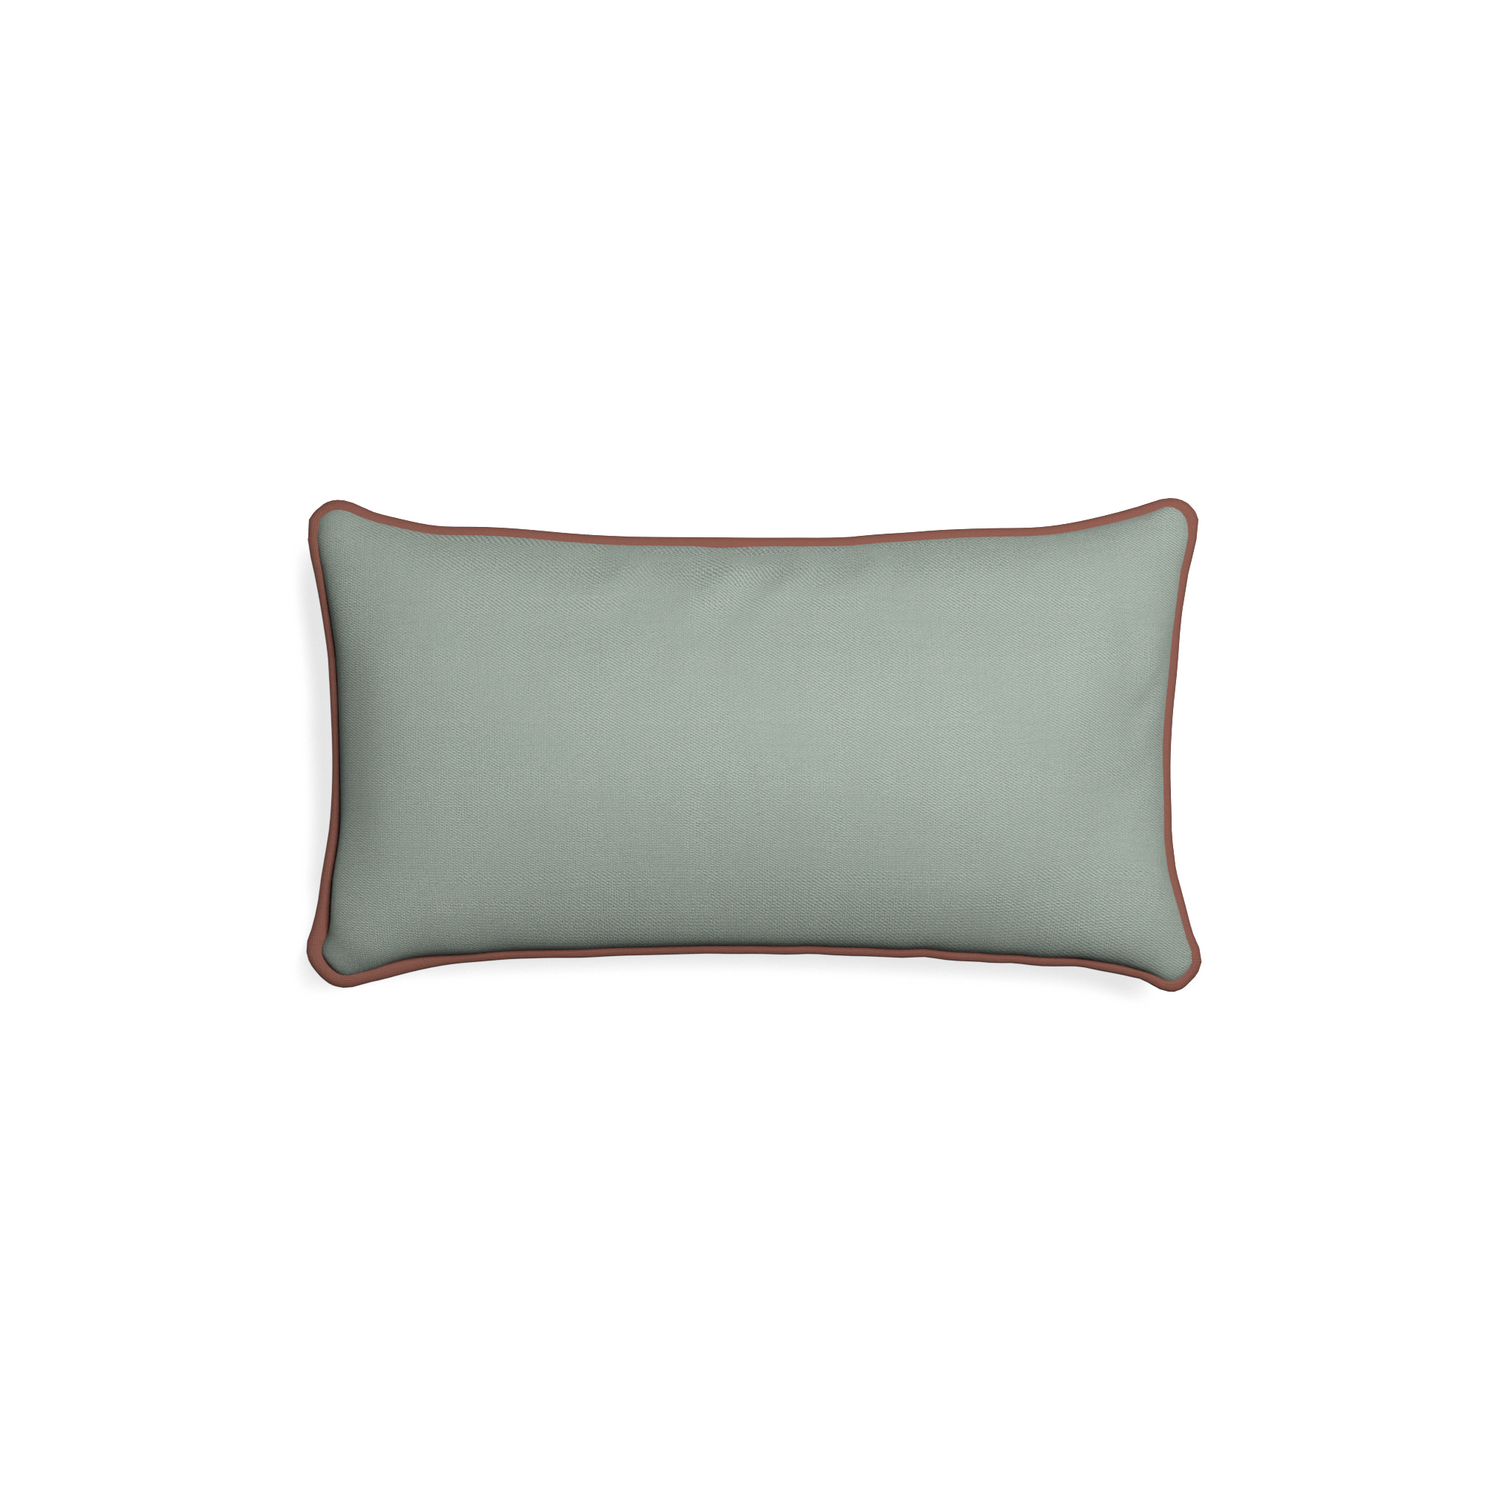 Petite-lumbar sage custom sage green cottonpillow with w piping on white background